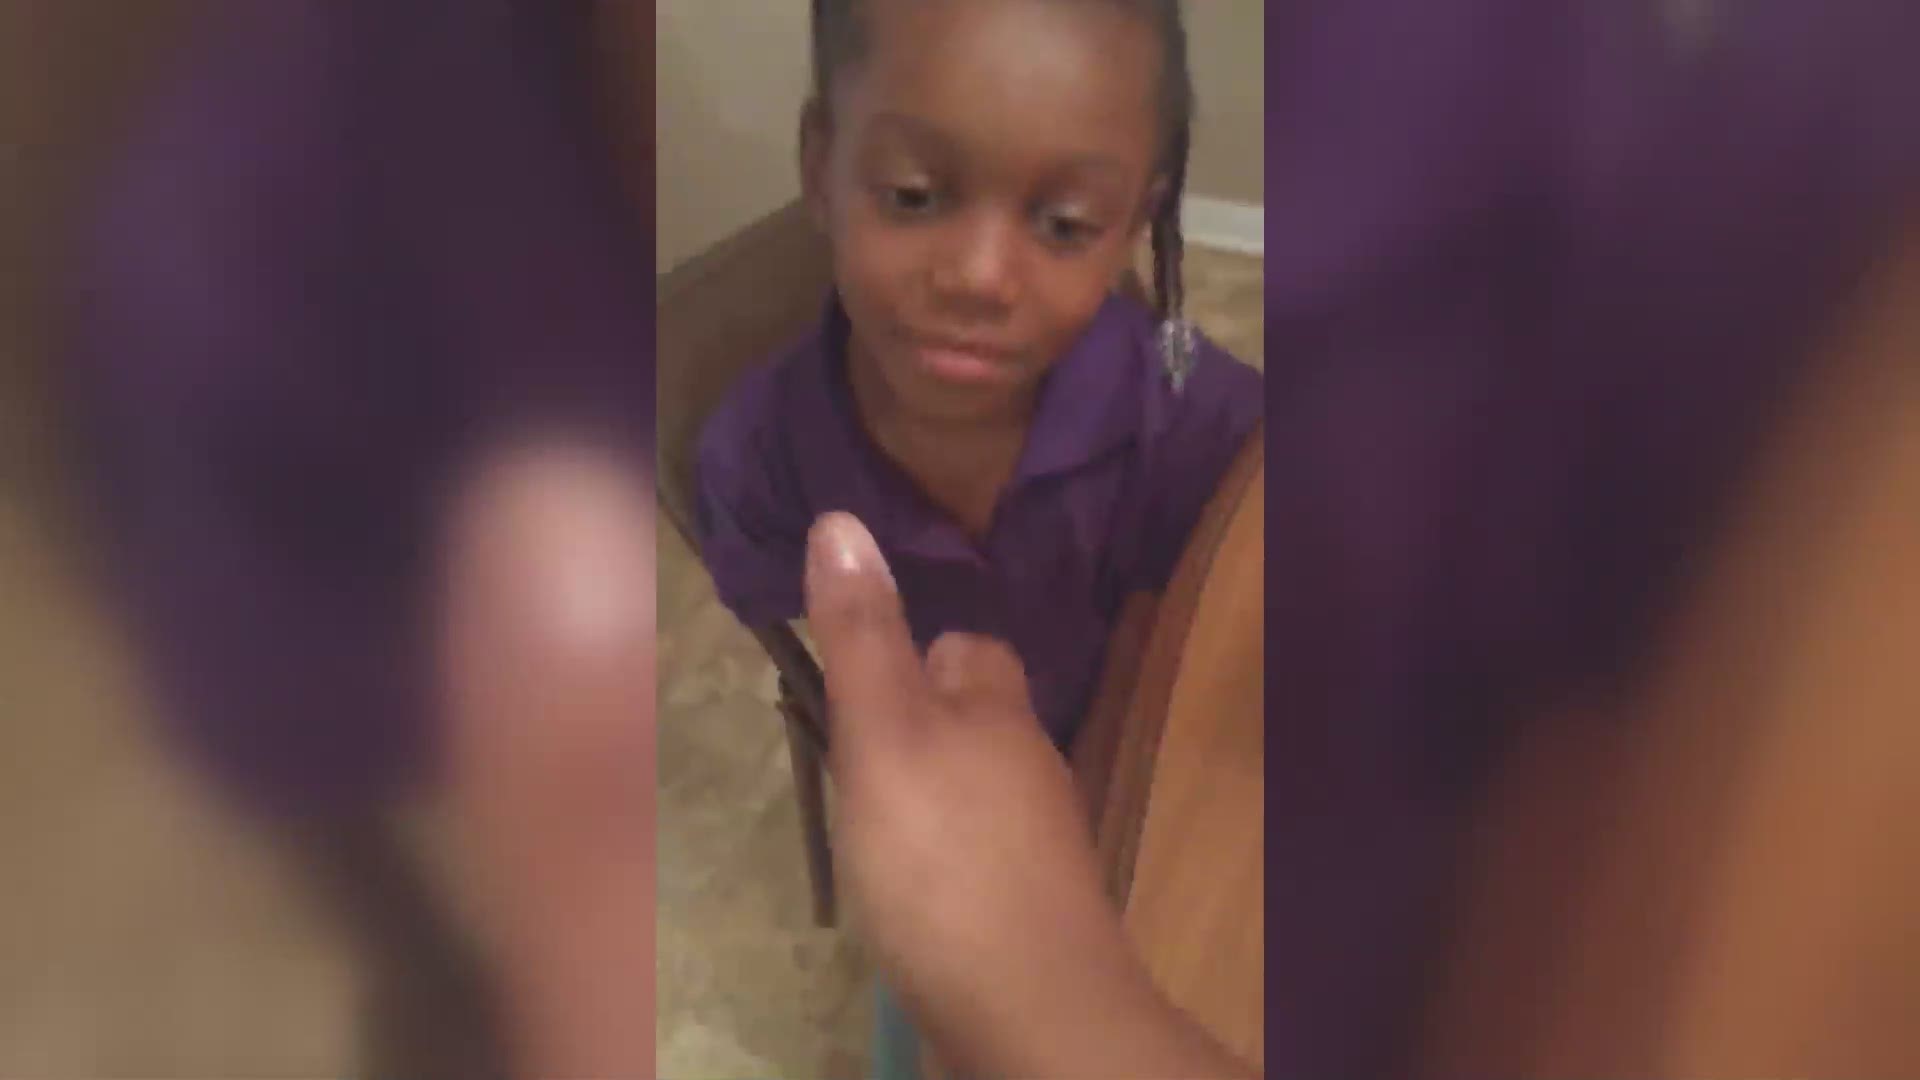 In a heartwarming video posted to Shaketha McGregor's Facebook page after her now-viral post, she offers her 6-year-old Serinity a job and has her sign the 'paperwork.'